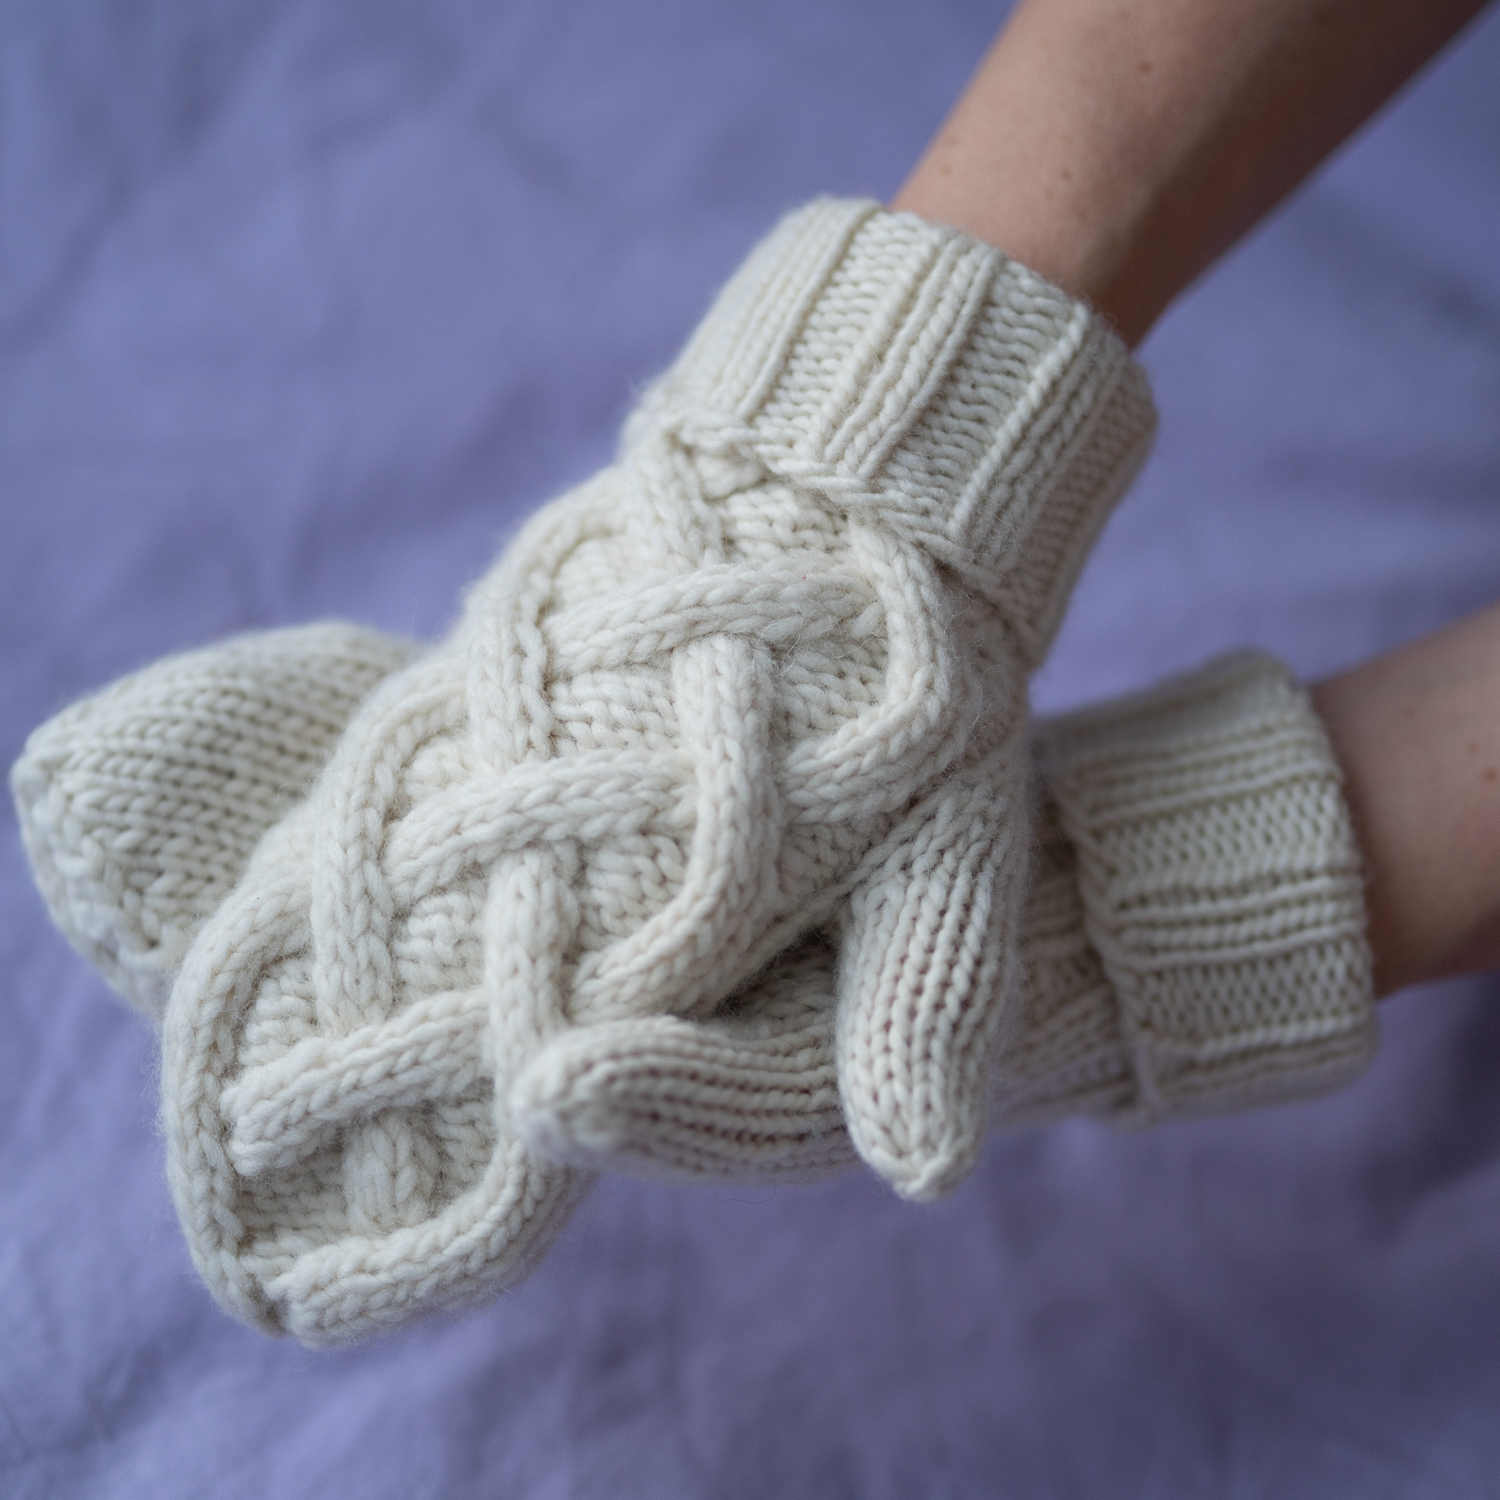  - Snow dance mittens | Cable knit mittens | Knitting kit - by HipKnitShop - 17/01/2021